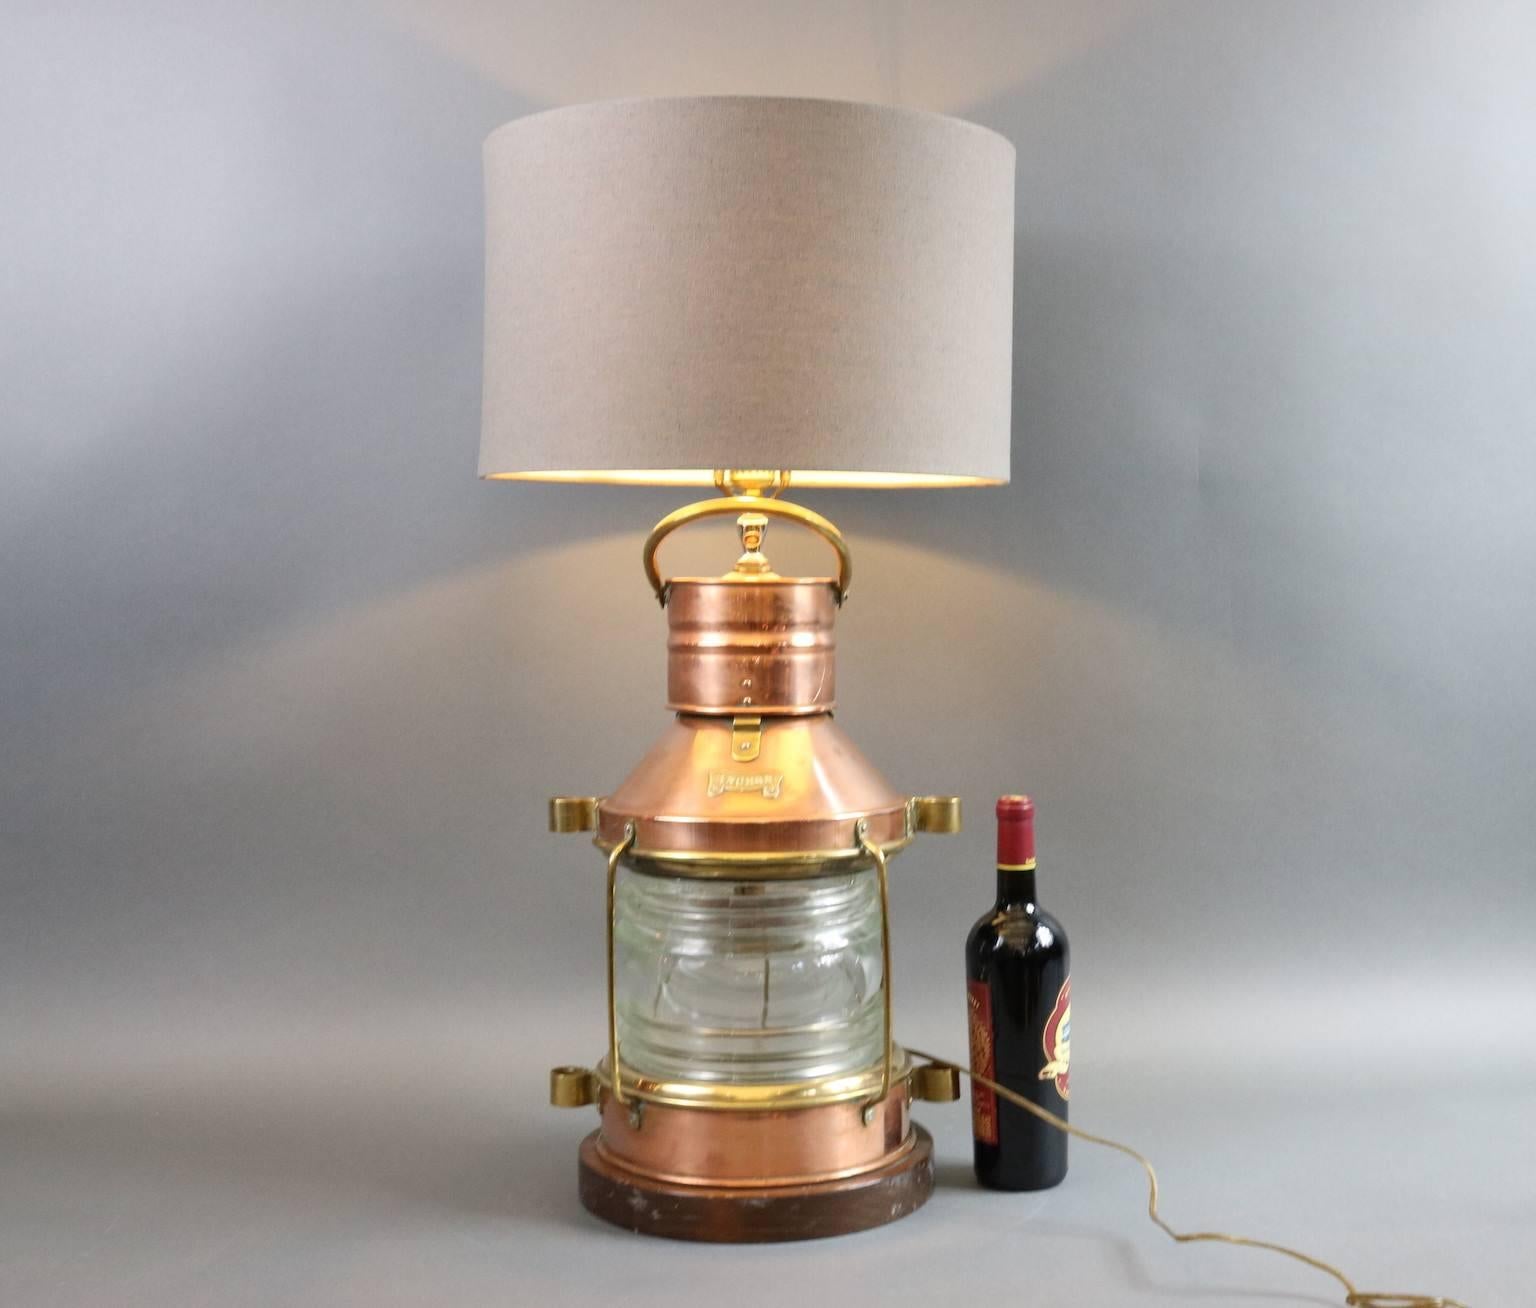 Ship's solid copper anchor lantern with Fresnel glass lens, brass bars, and etc. Lantern has been transformed into a lamp with thick wood base. Dimensions: 19" height (lantern only) x 12" diameter.